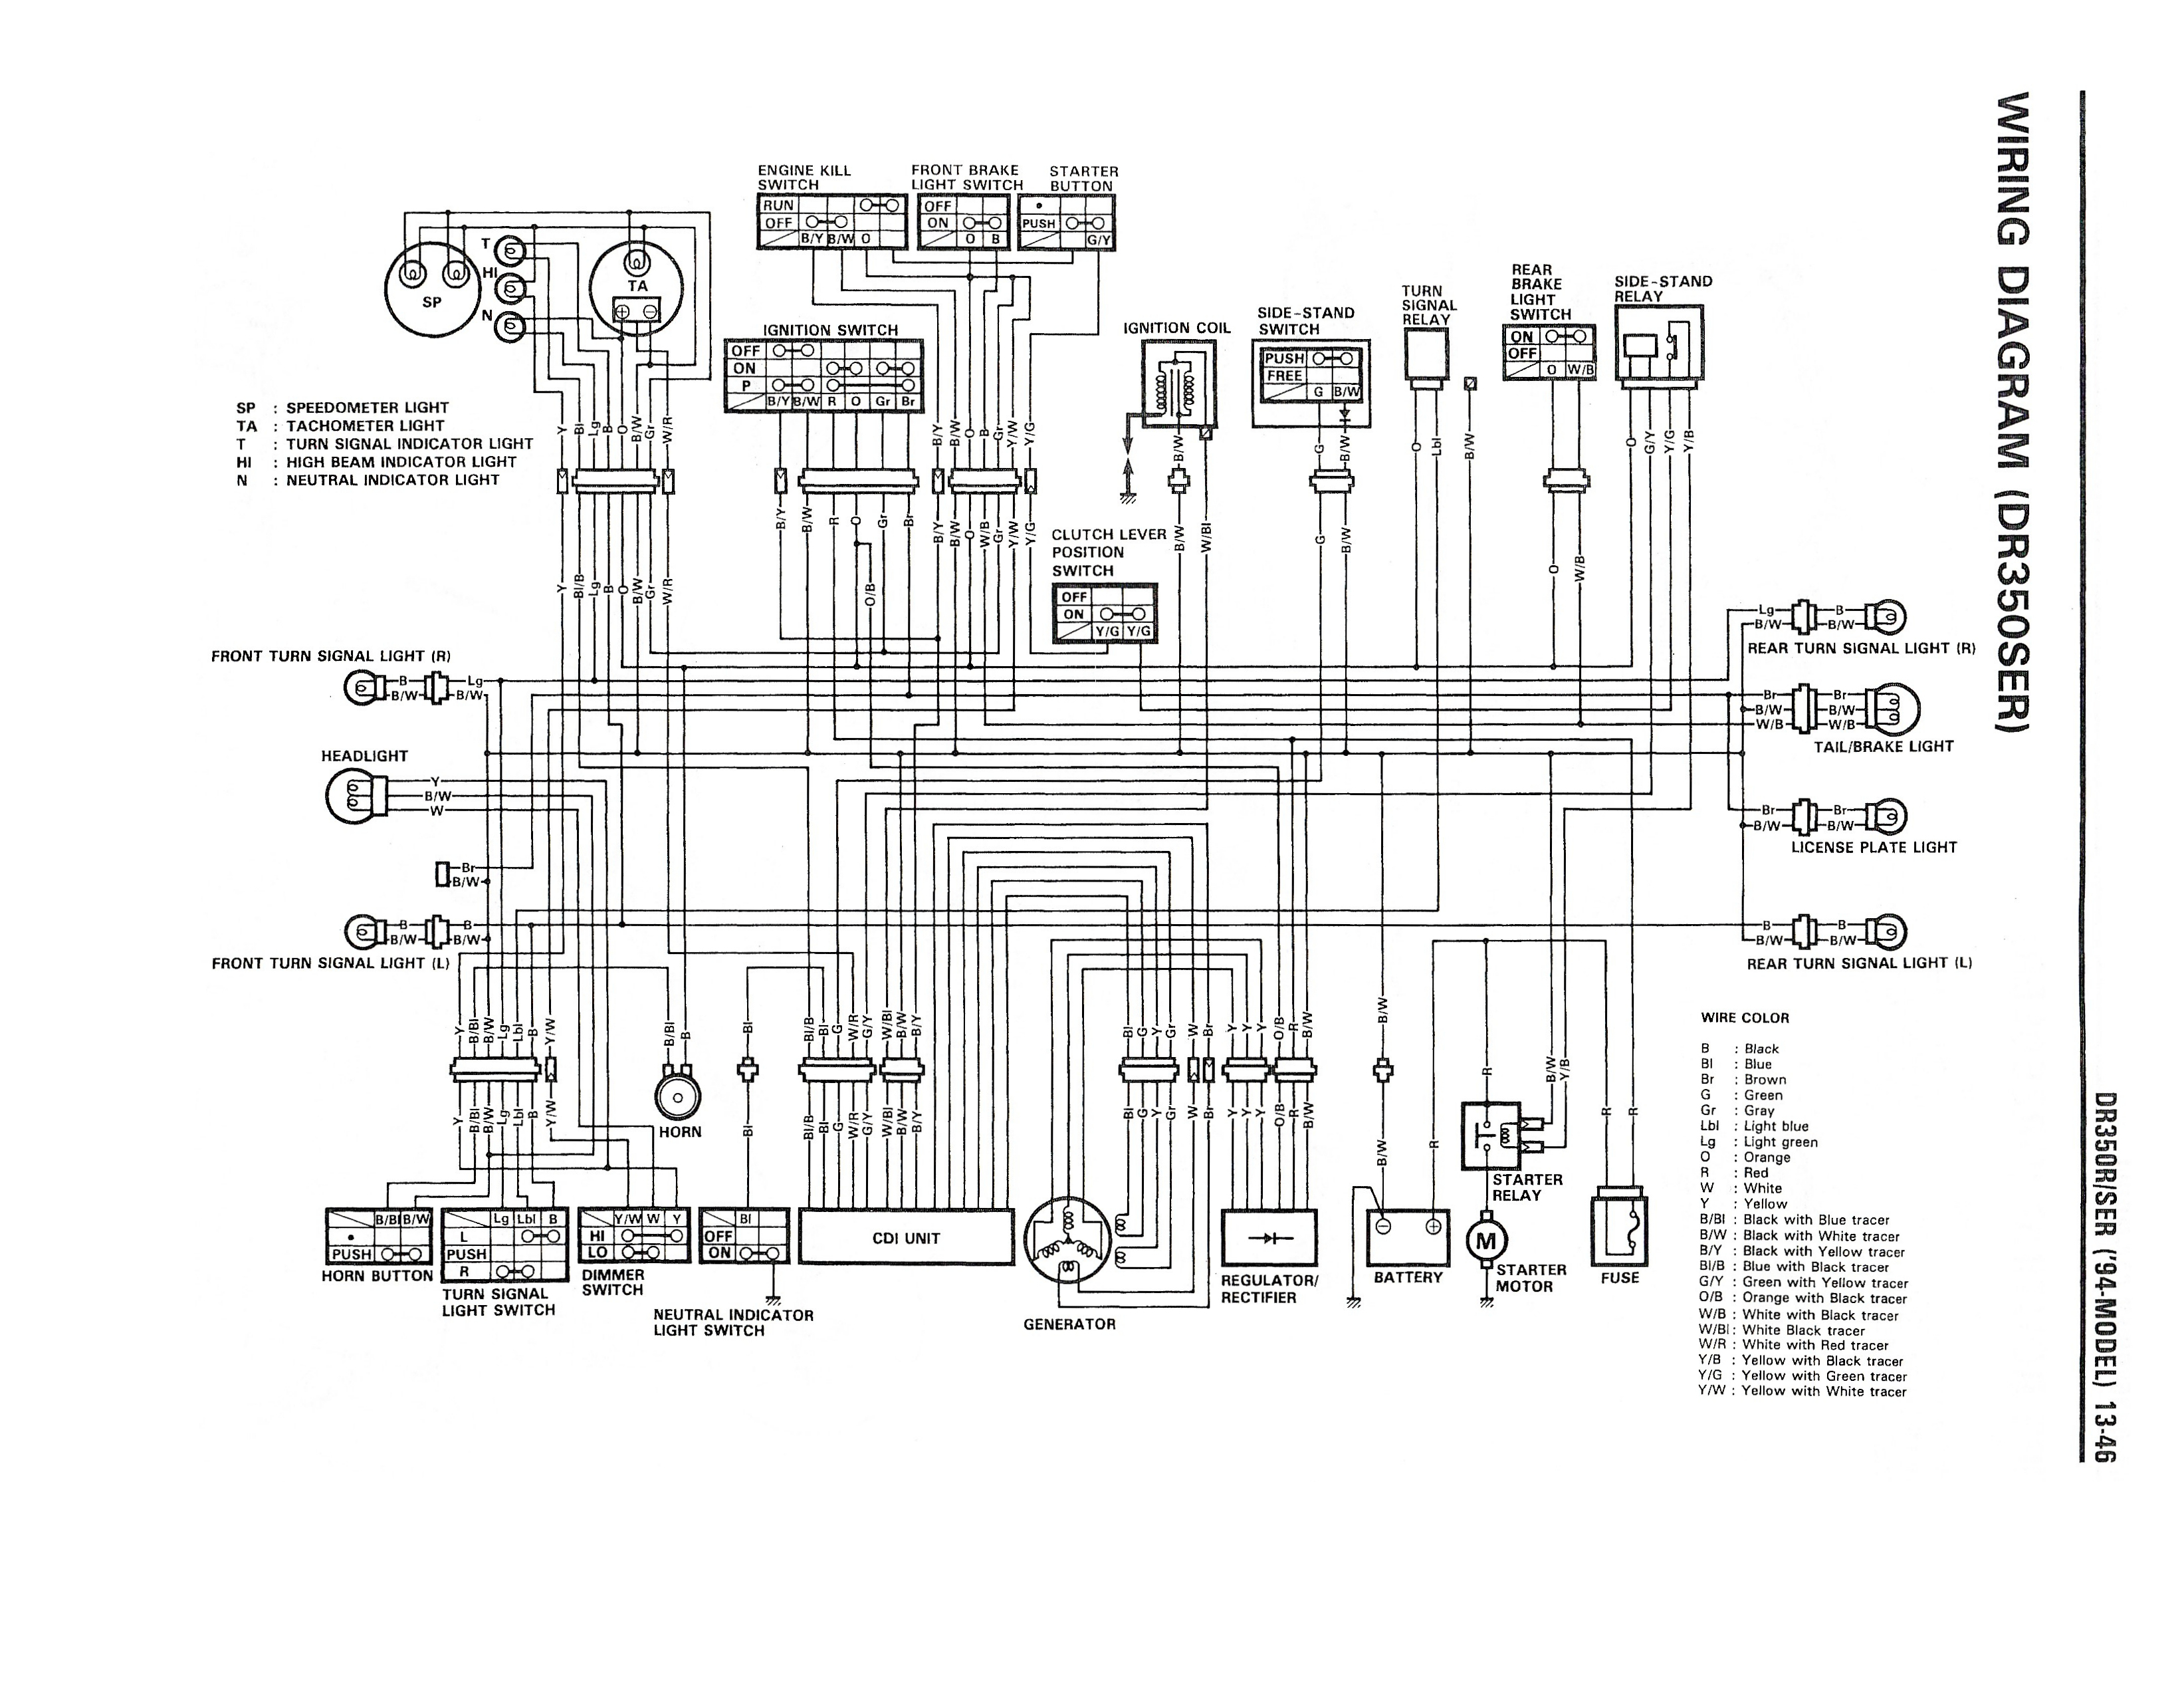 Wiring diagram for the DR350 SE (1994 and later models)